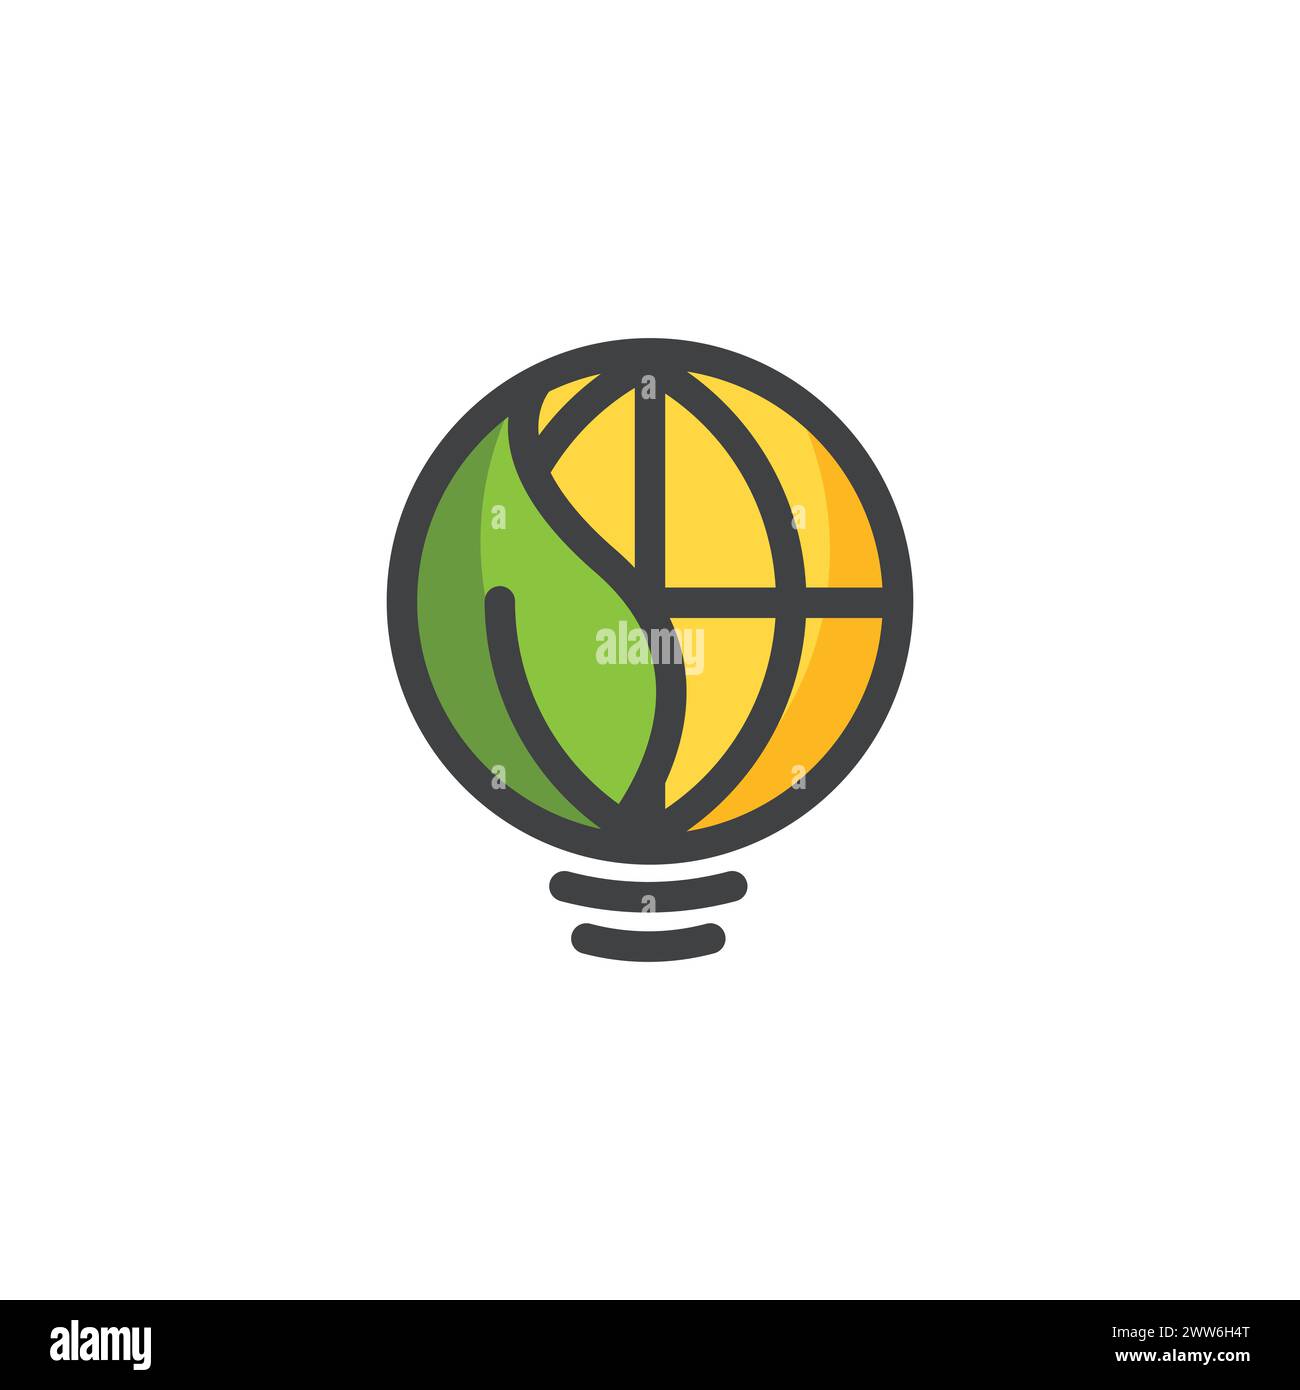 Green energy logo illustration. Lamp with globe and leaves. Ecology concept with light bulb, earth and leaves. Save energy icon sign symbol. Stock Vector